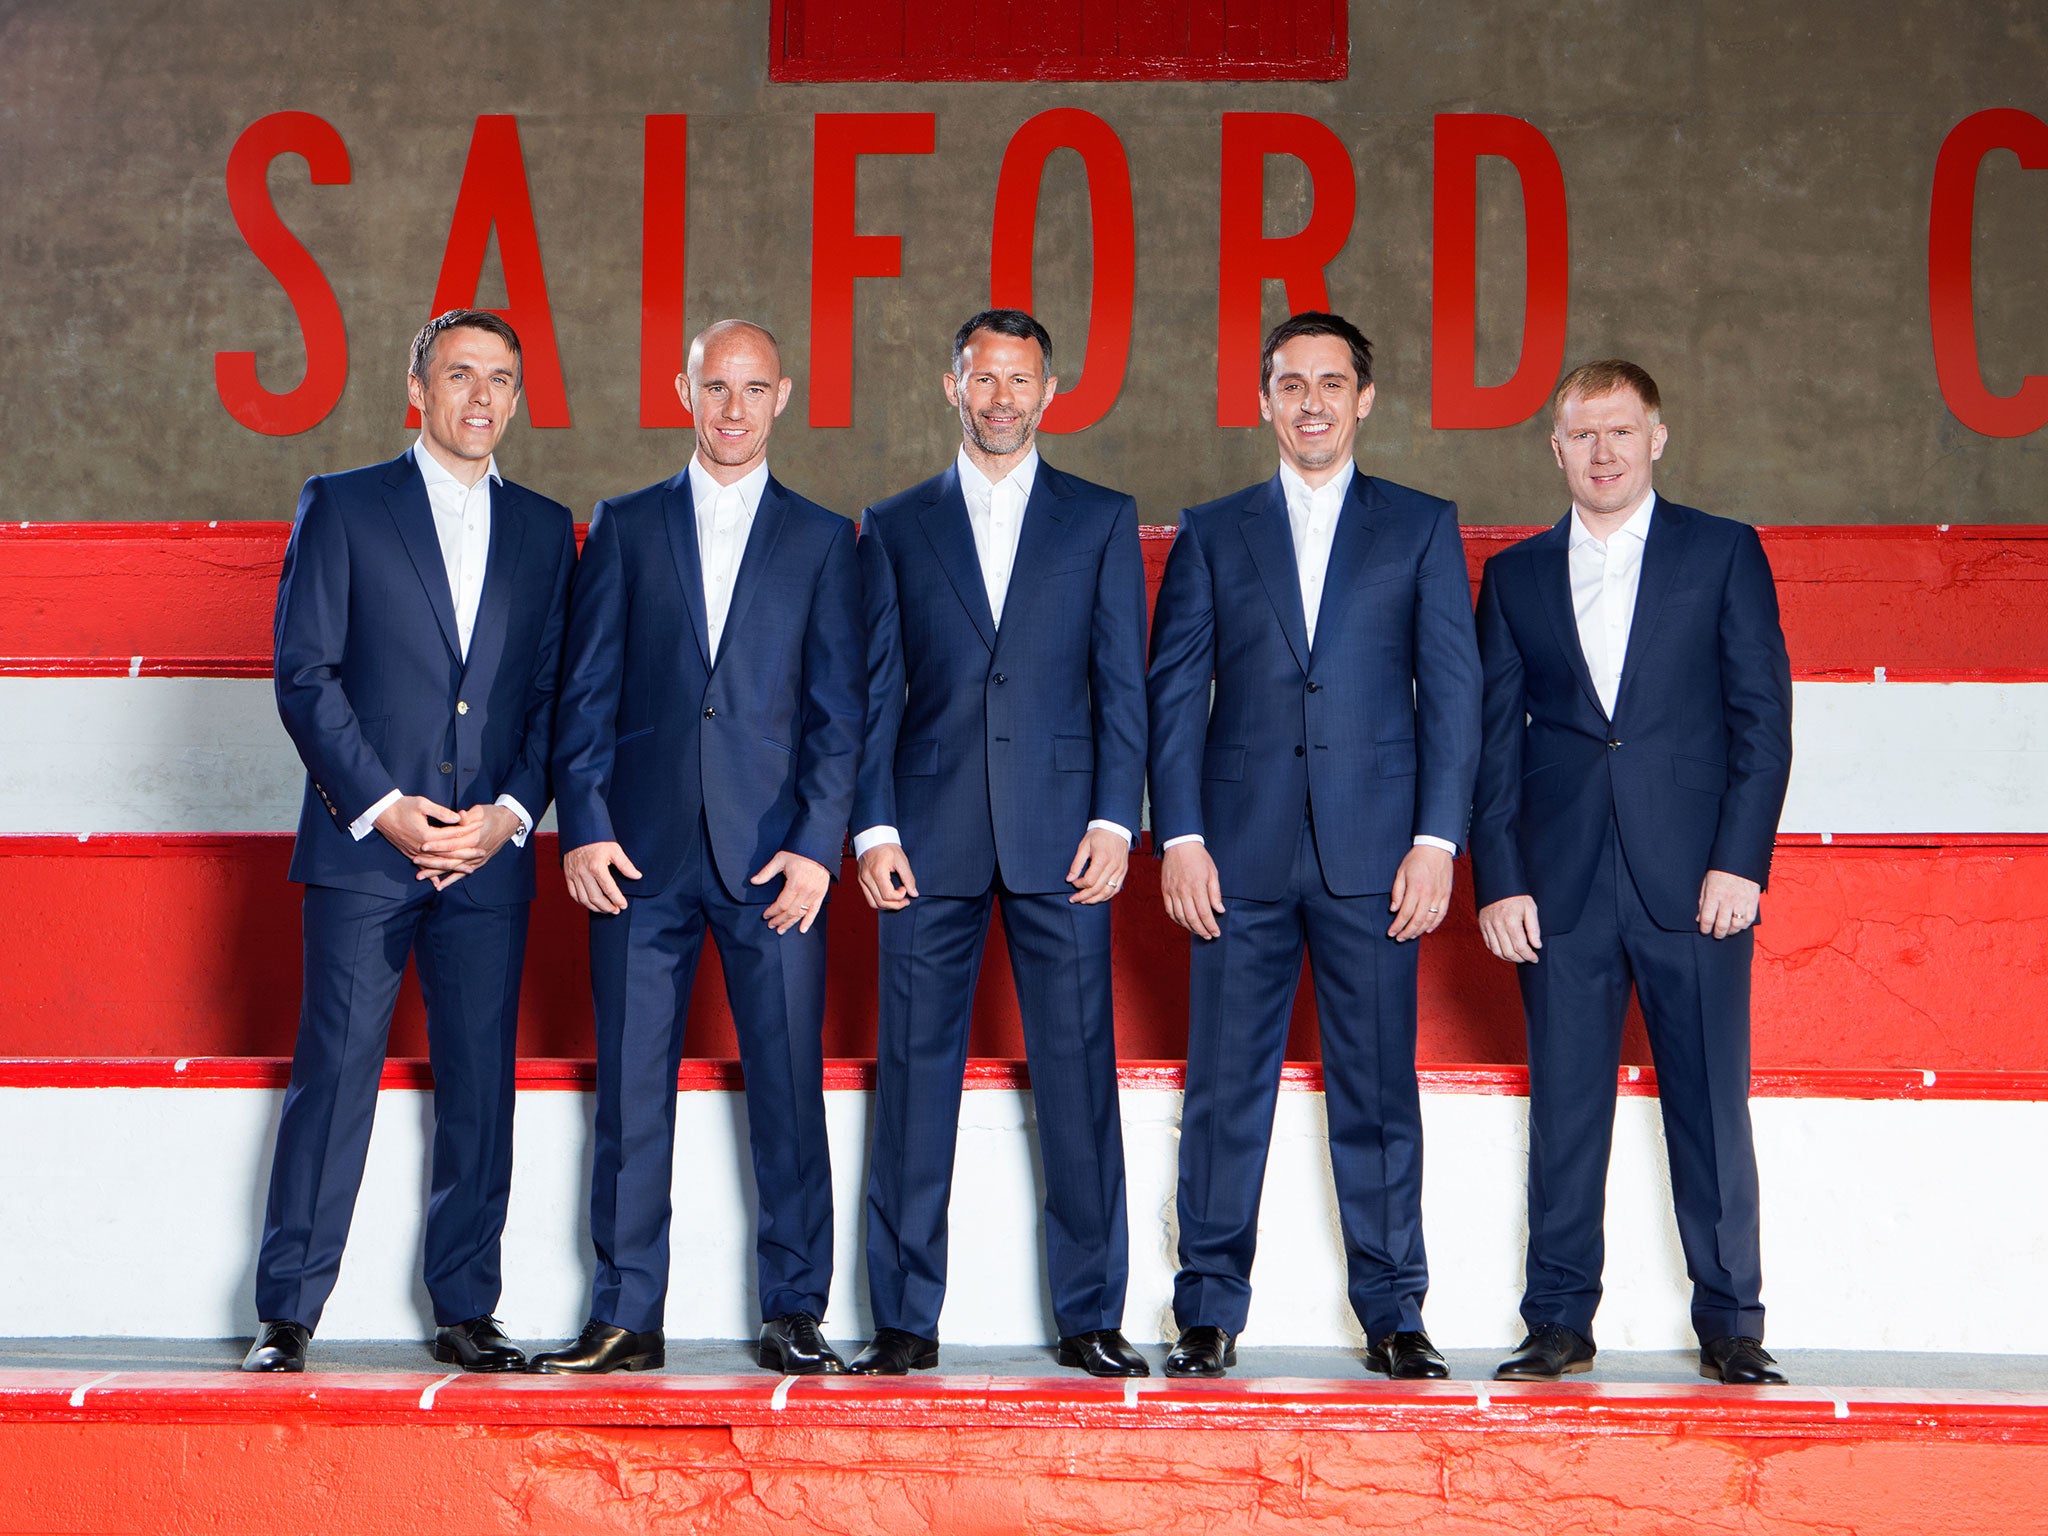 Five in the middle: Phil Neville, Nicky Butt, Ryan Giggs, Gary Neville and Paul Scholes of Manchester United’s ‘Class of 92’ – now the owners of Salford City FC